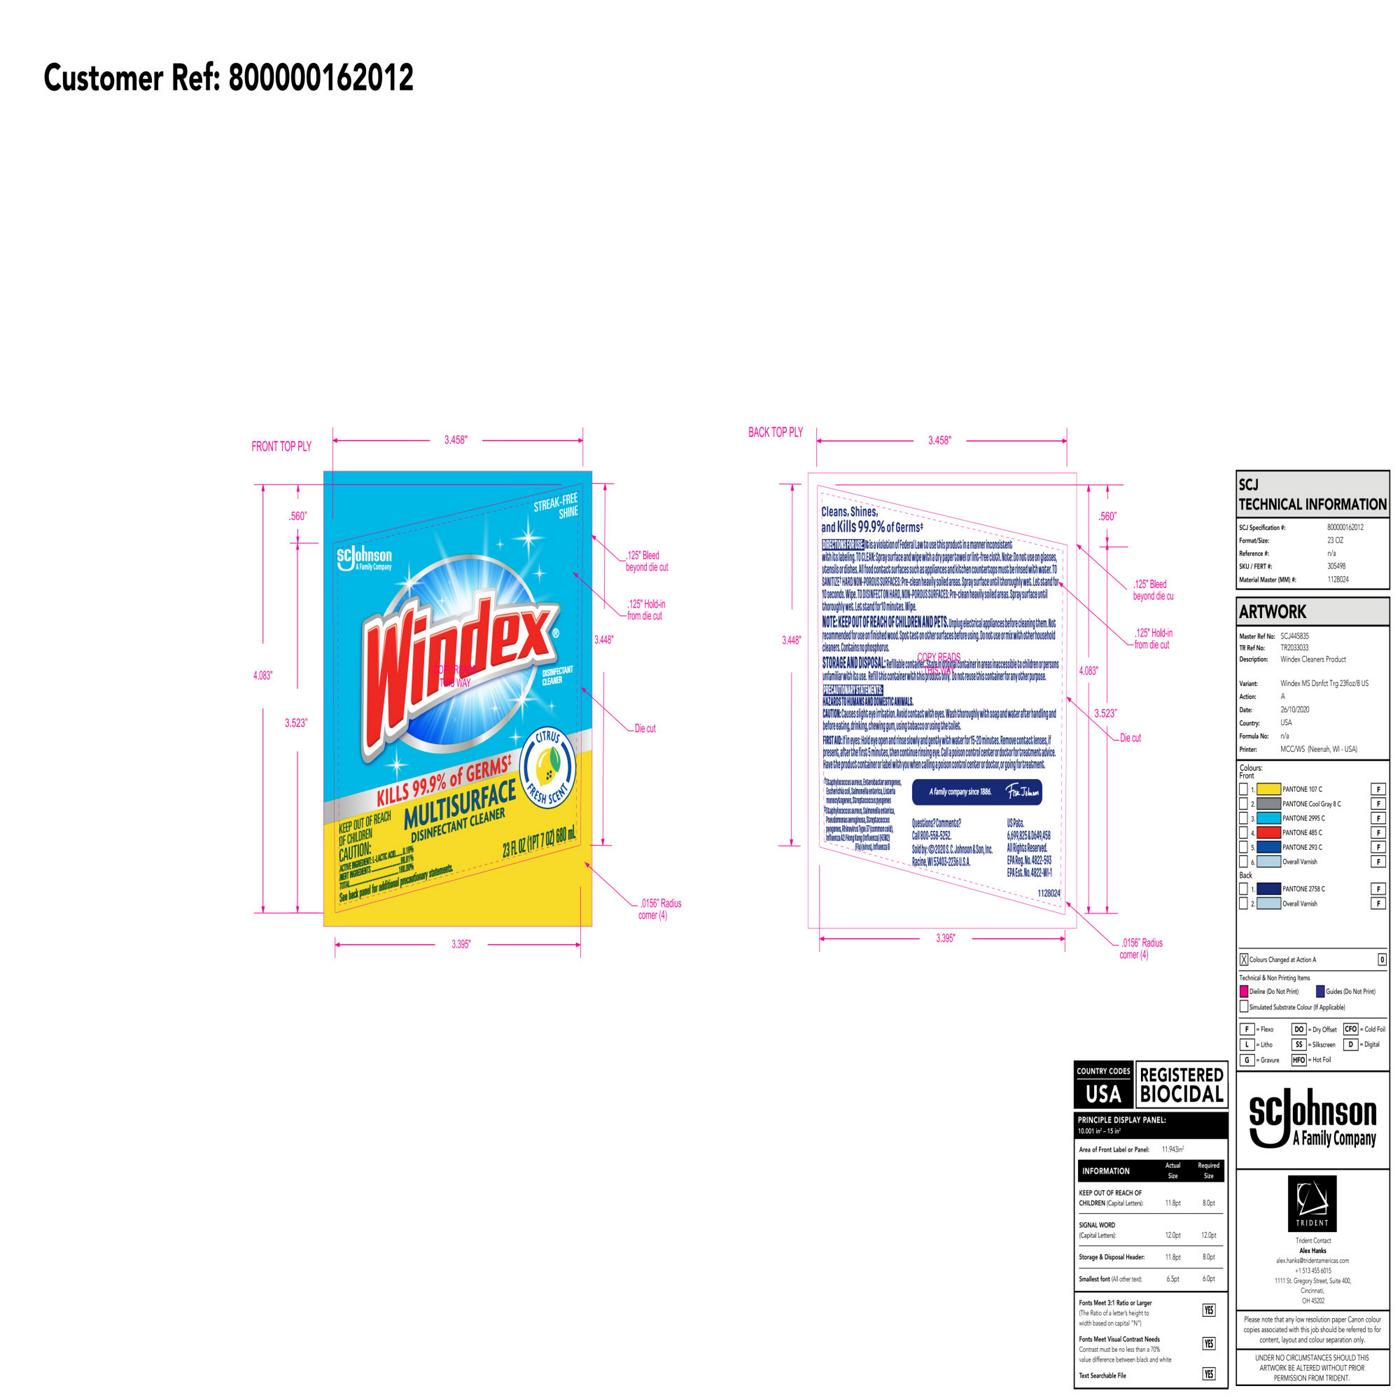 Windex Citrus Fresh Multi Surface Disinfectant Cleaner Spray; image 4 of 9